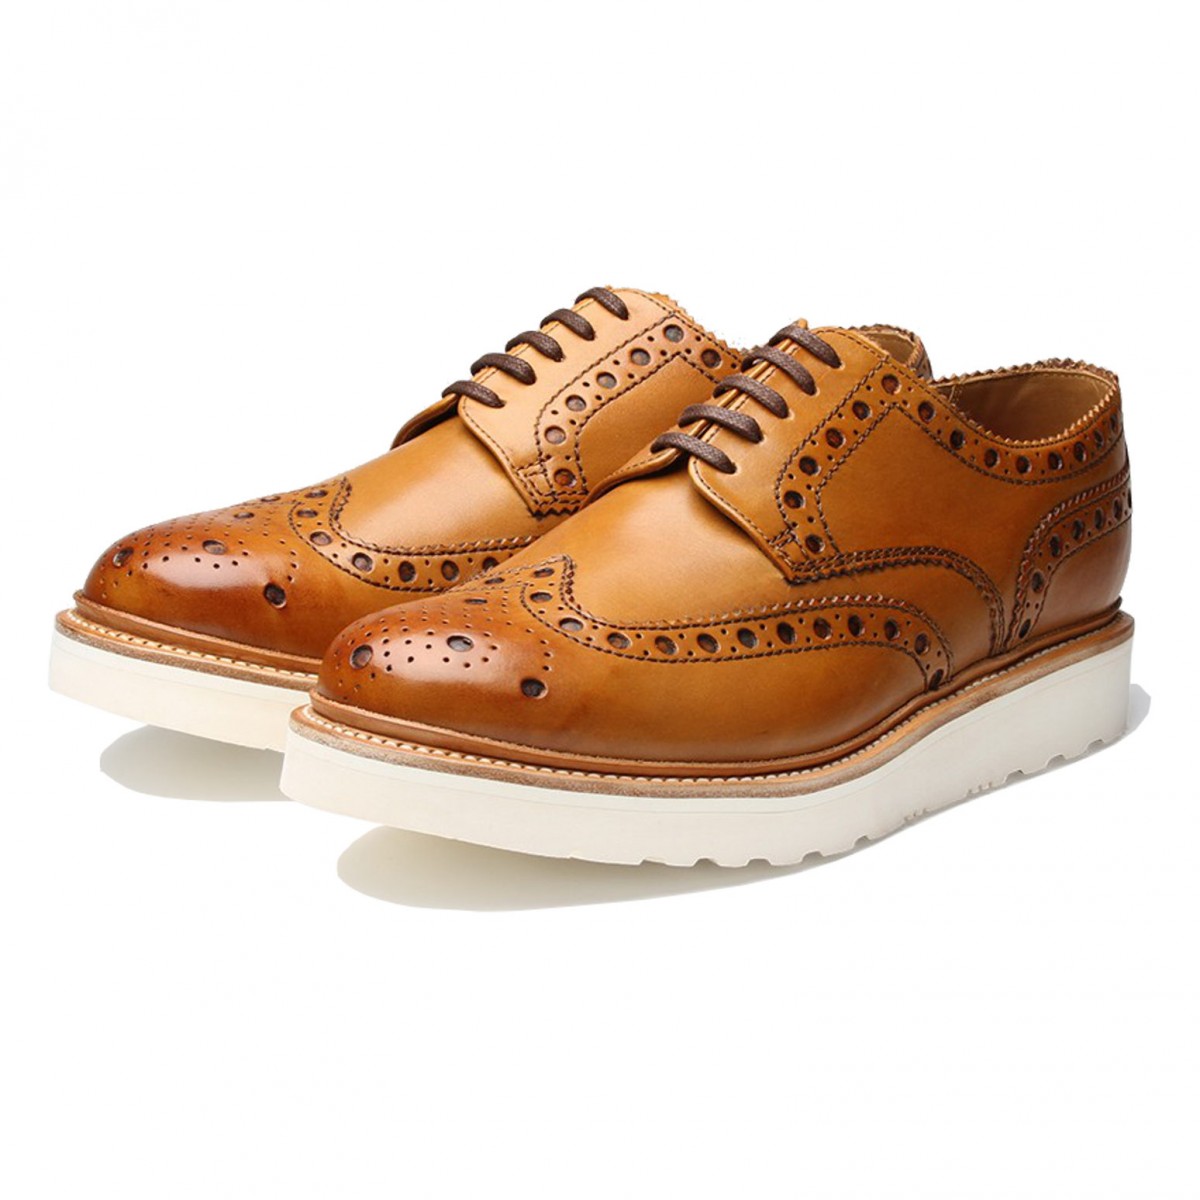 grenson archie review